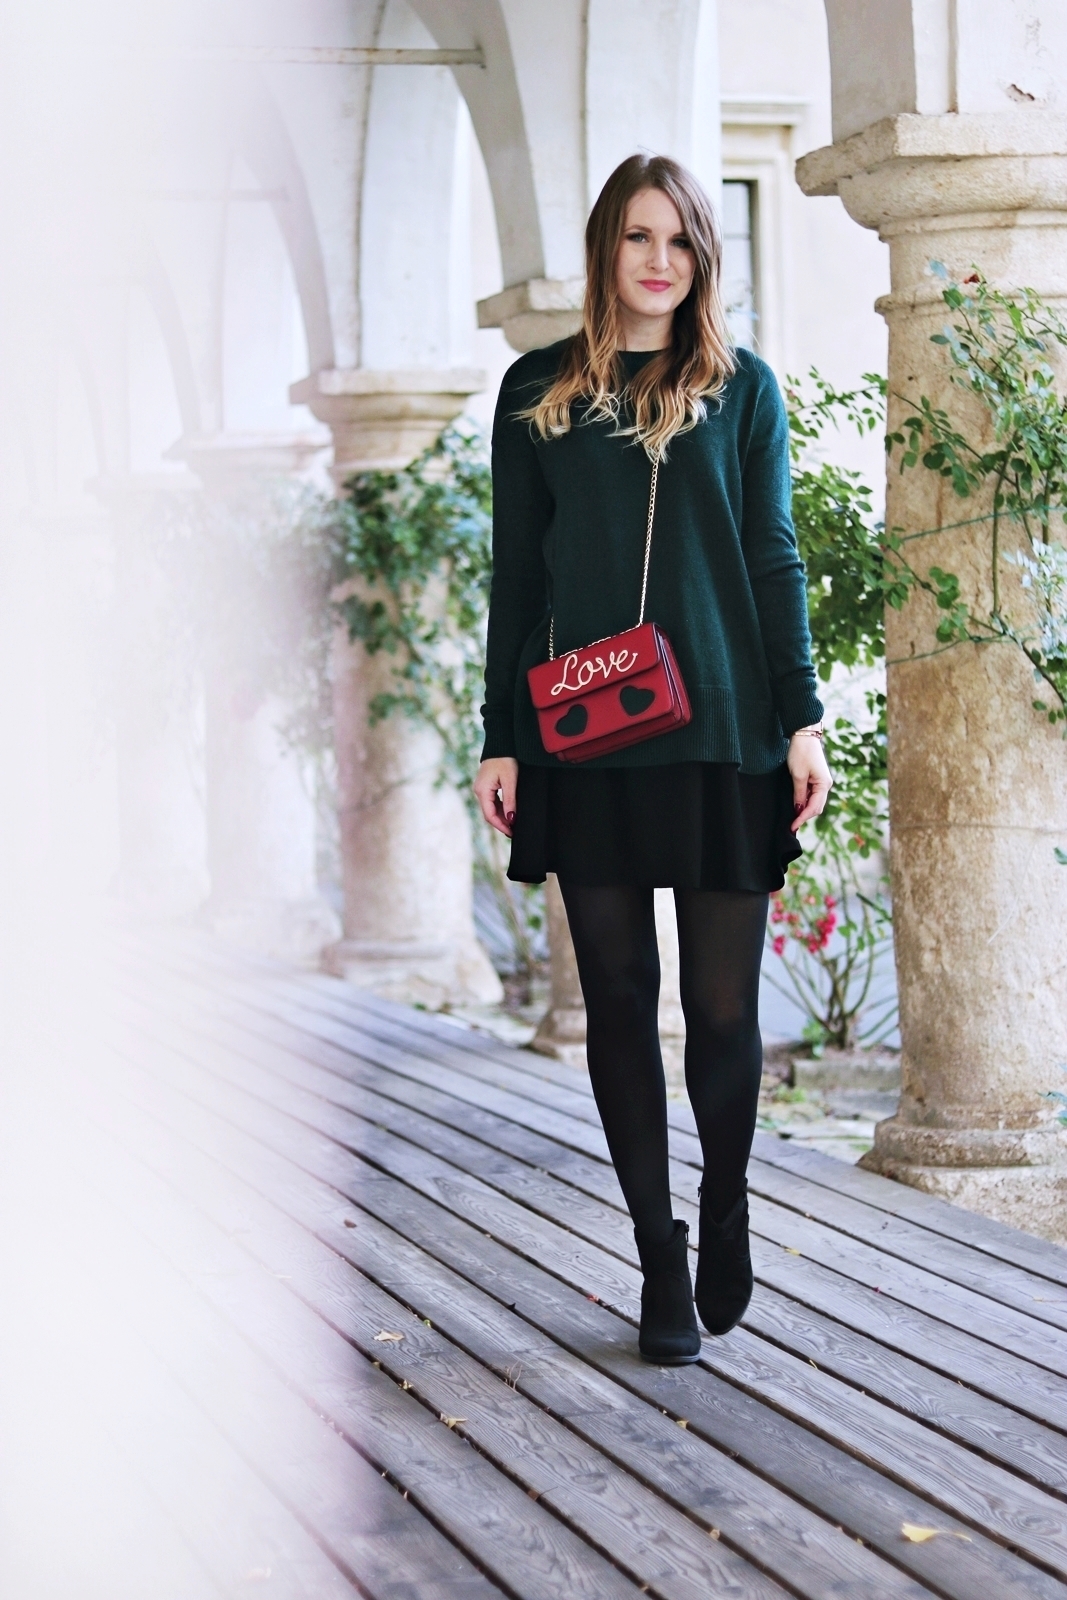 Fashion Lookbook Herbst - Herbst Outfit Inspirationen - Herbst Mode - Herbst Trends - Herbst Outfits - Modetrends - alltagstaugliche Herbstmode - herbstliche Outfit Kombination - Herbst Style - Fashionladyloves by Tamara Wagner - Fashion Blog - Mode Blog aus Graz Österreich